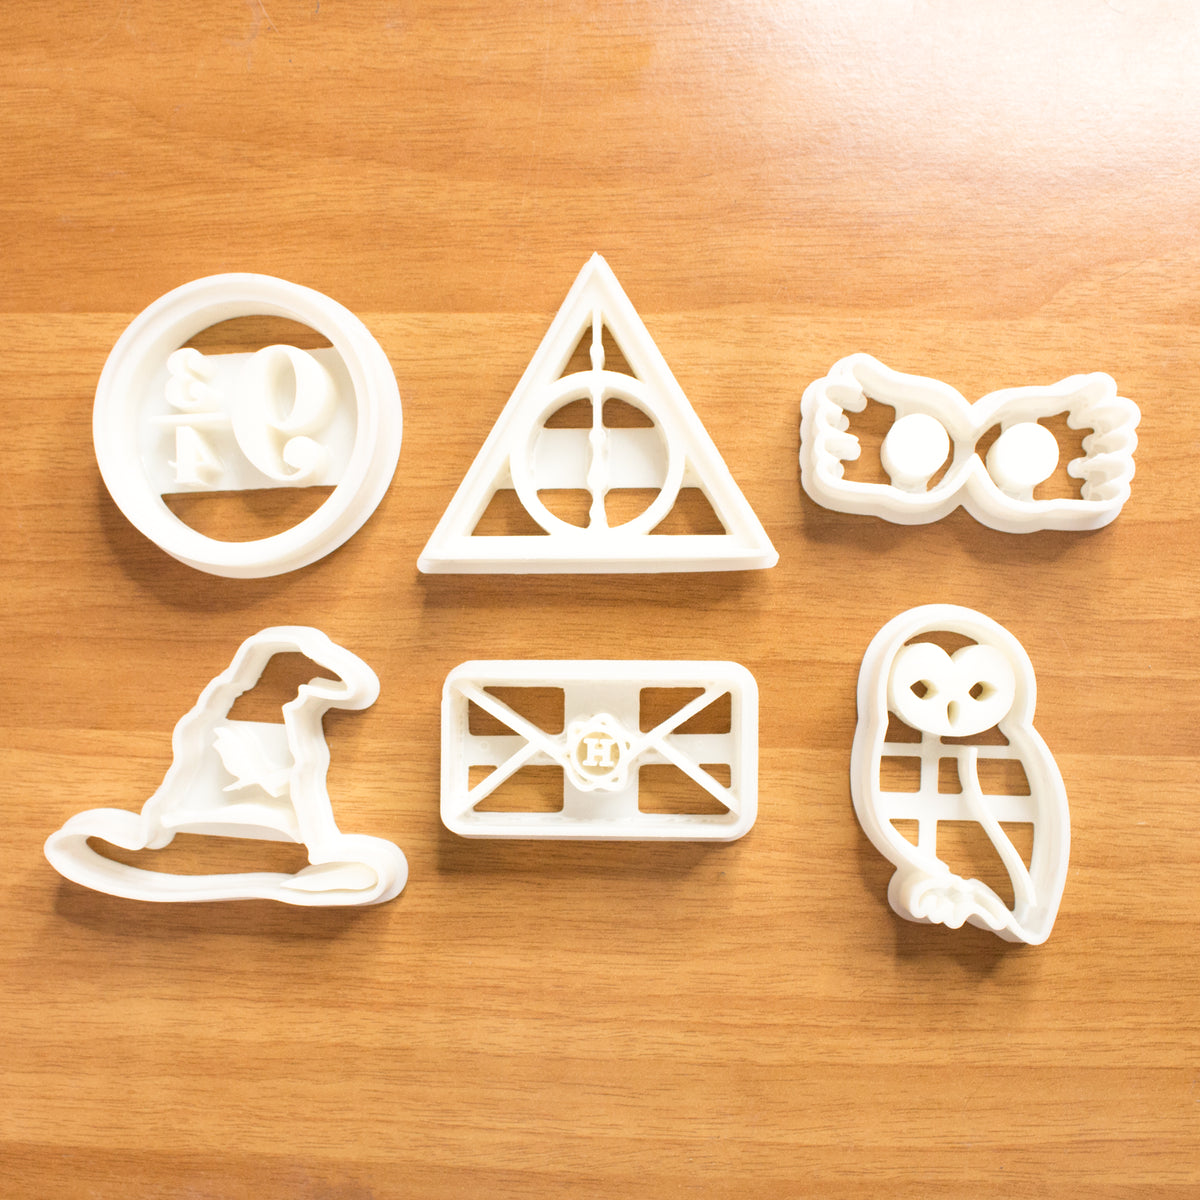 9 Magical “Harry Potter” Cookie Cutters That You Can Buy On